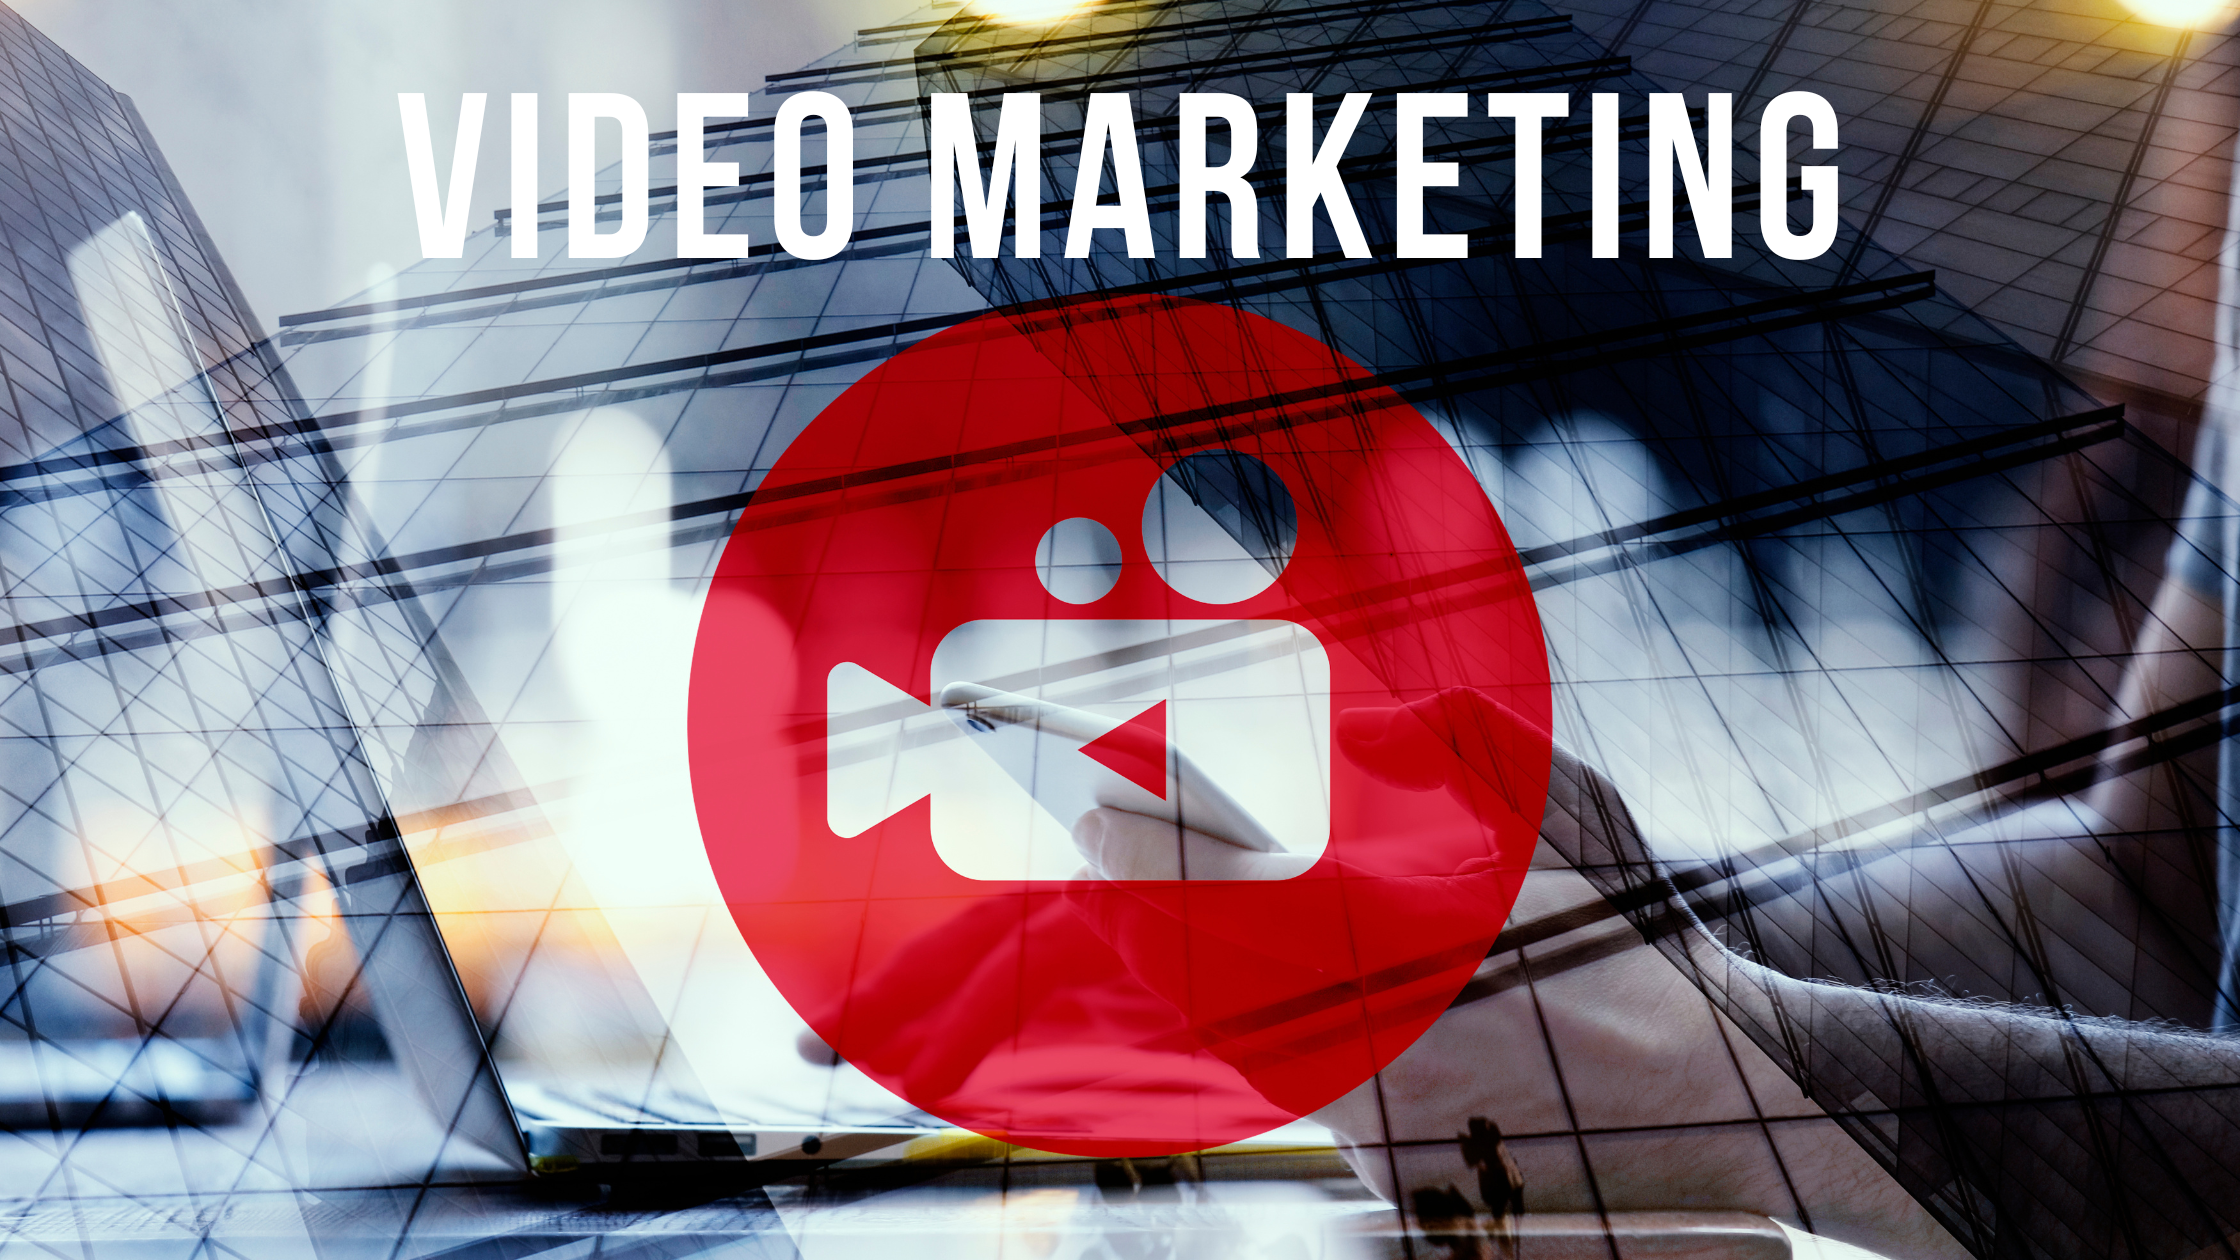 Video marketing ideas for small business